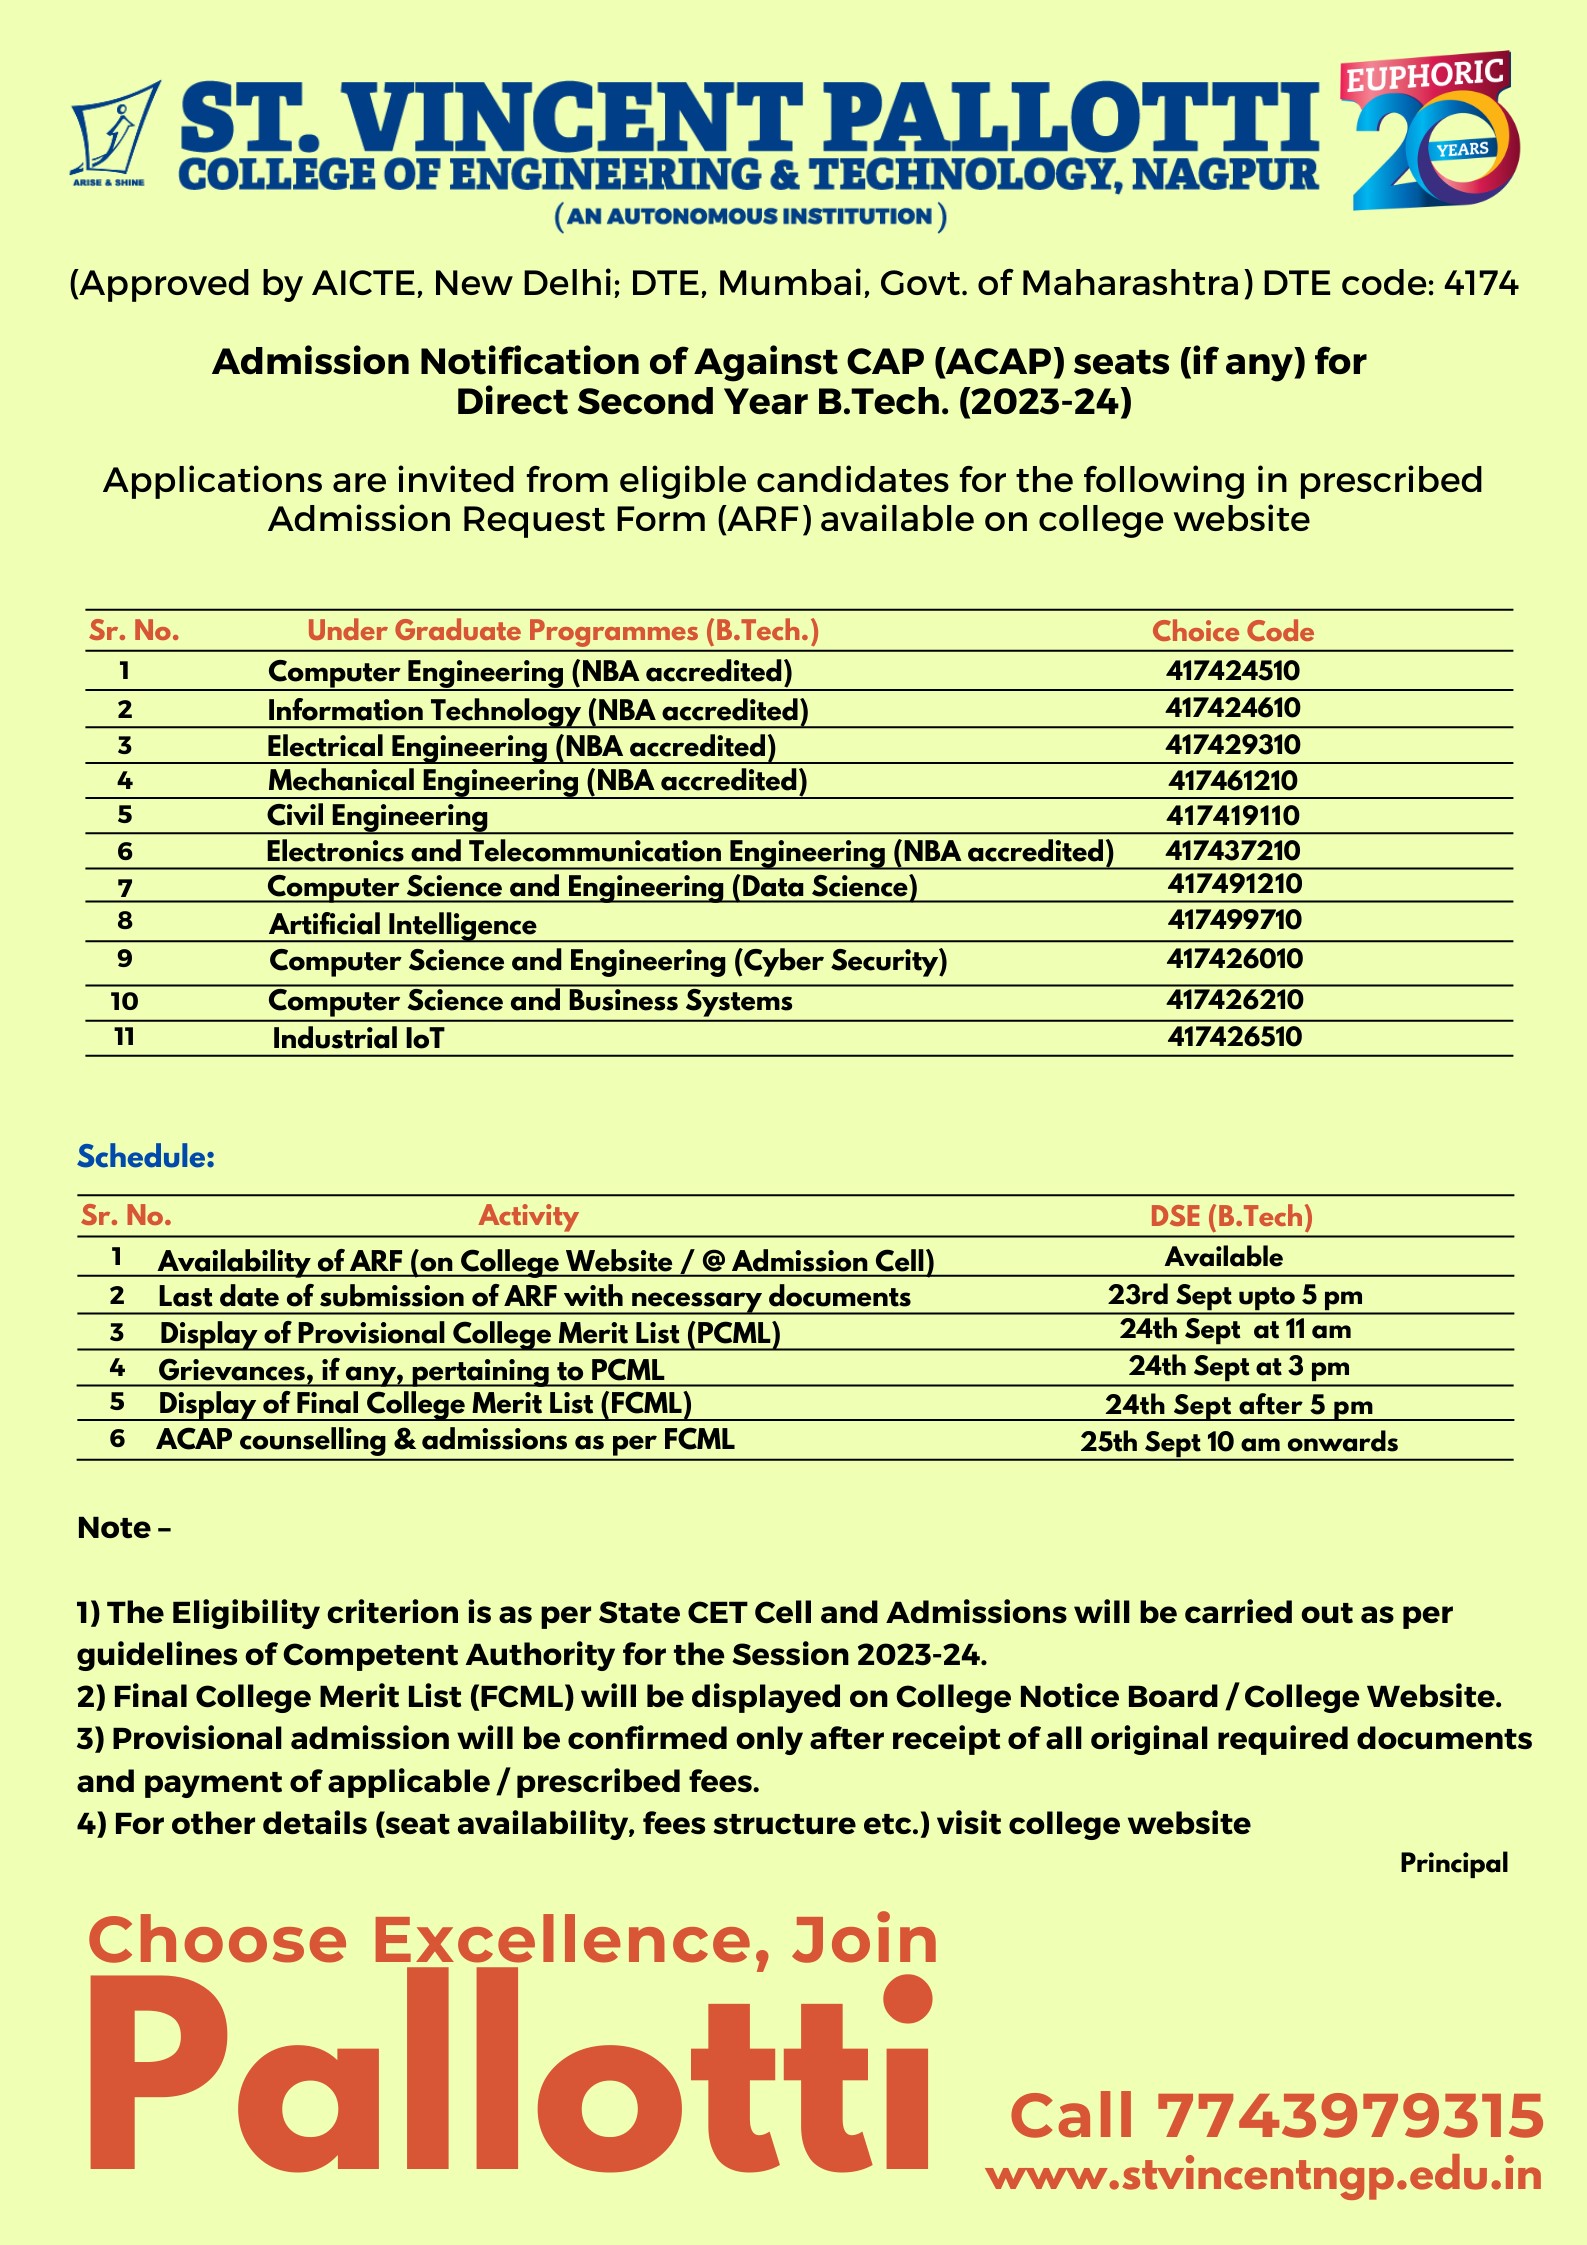 DSE Notification for ACAP Admission 2023-24